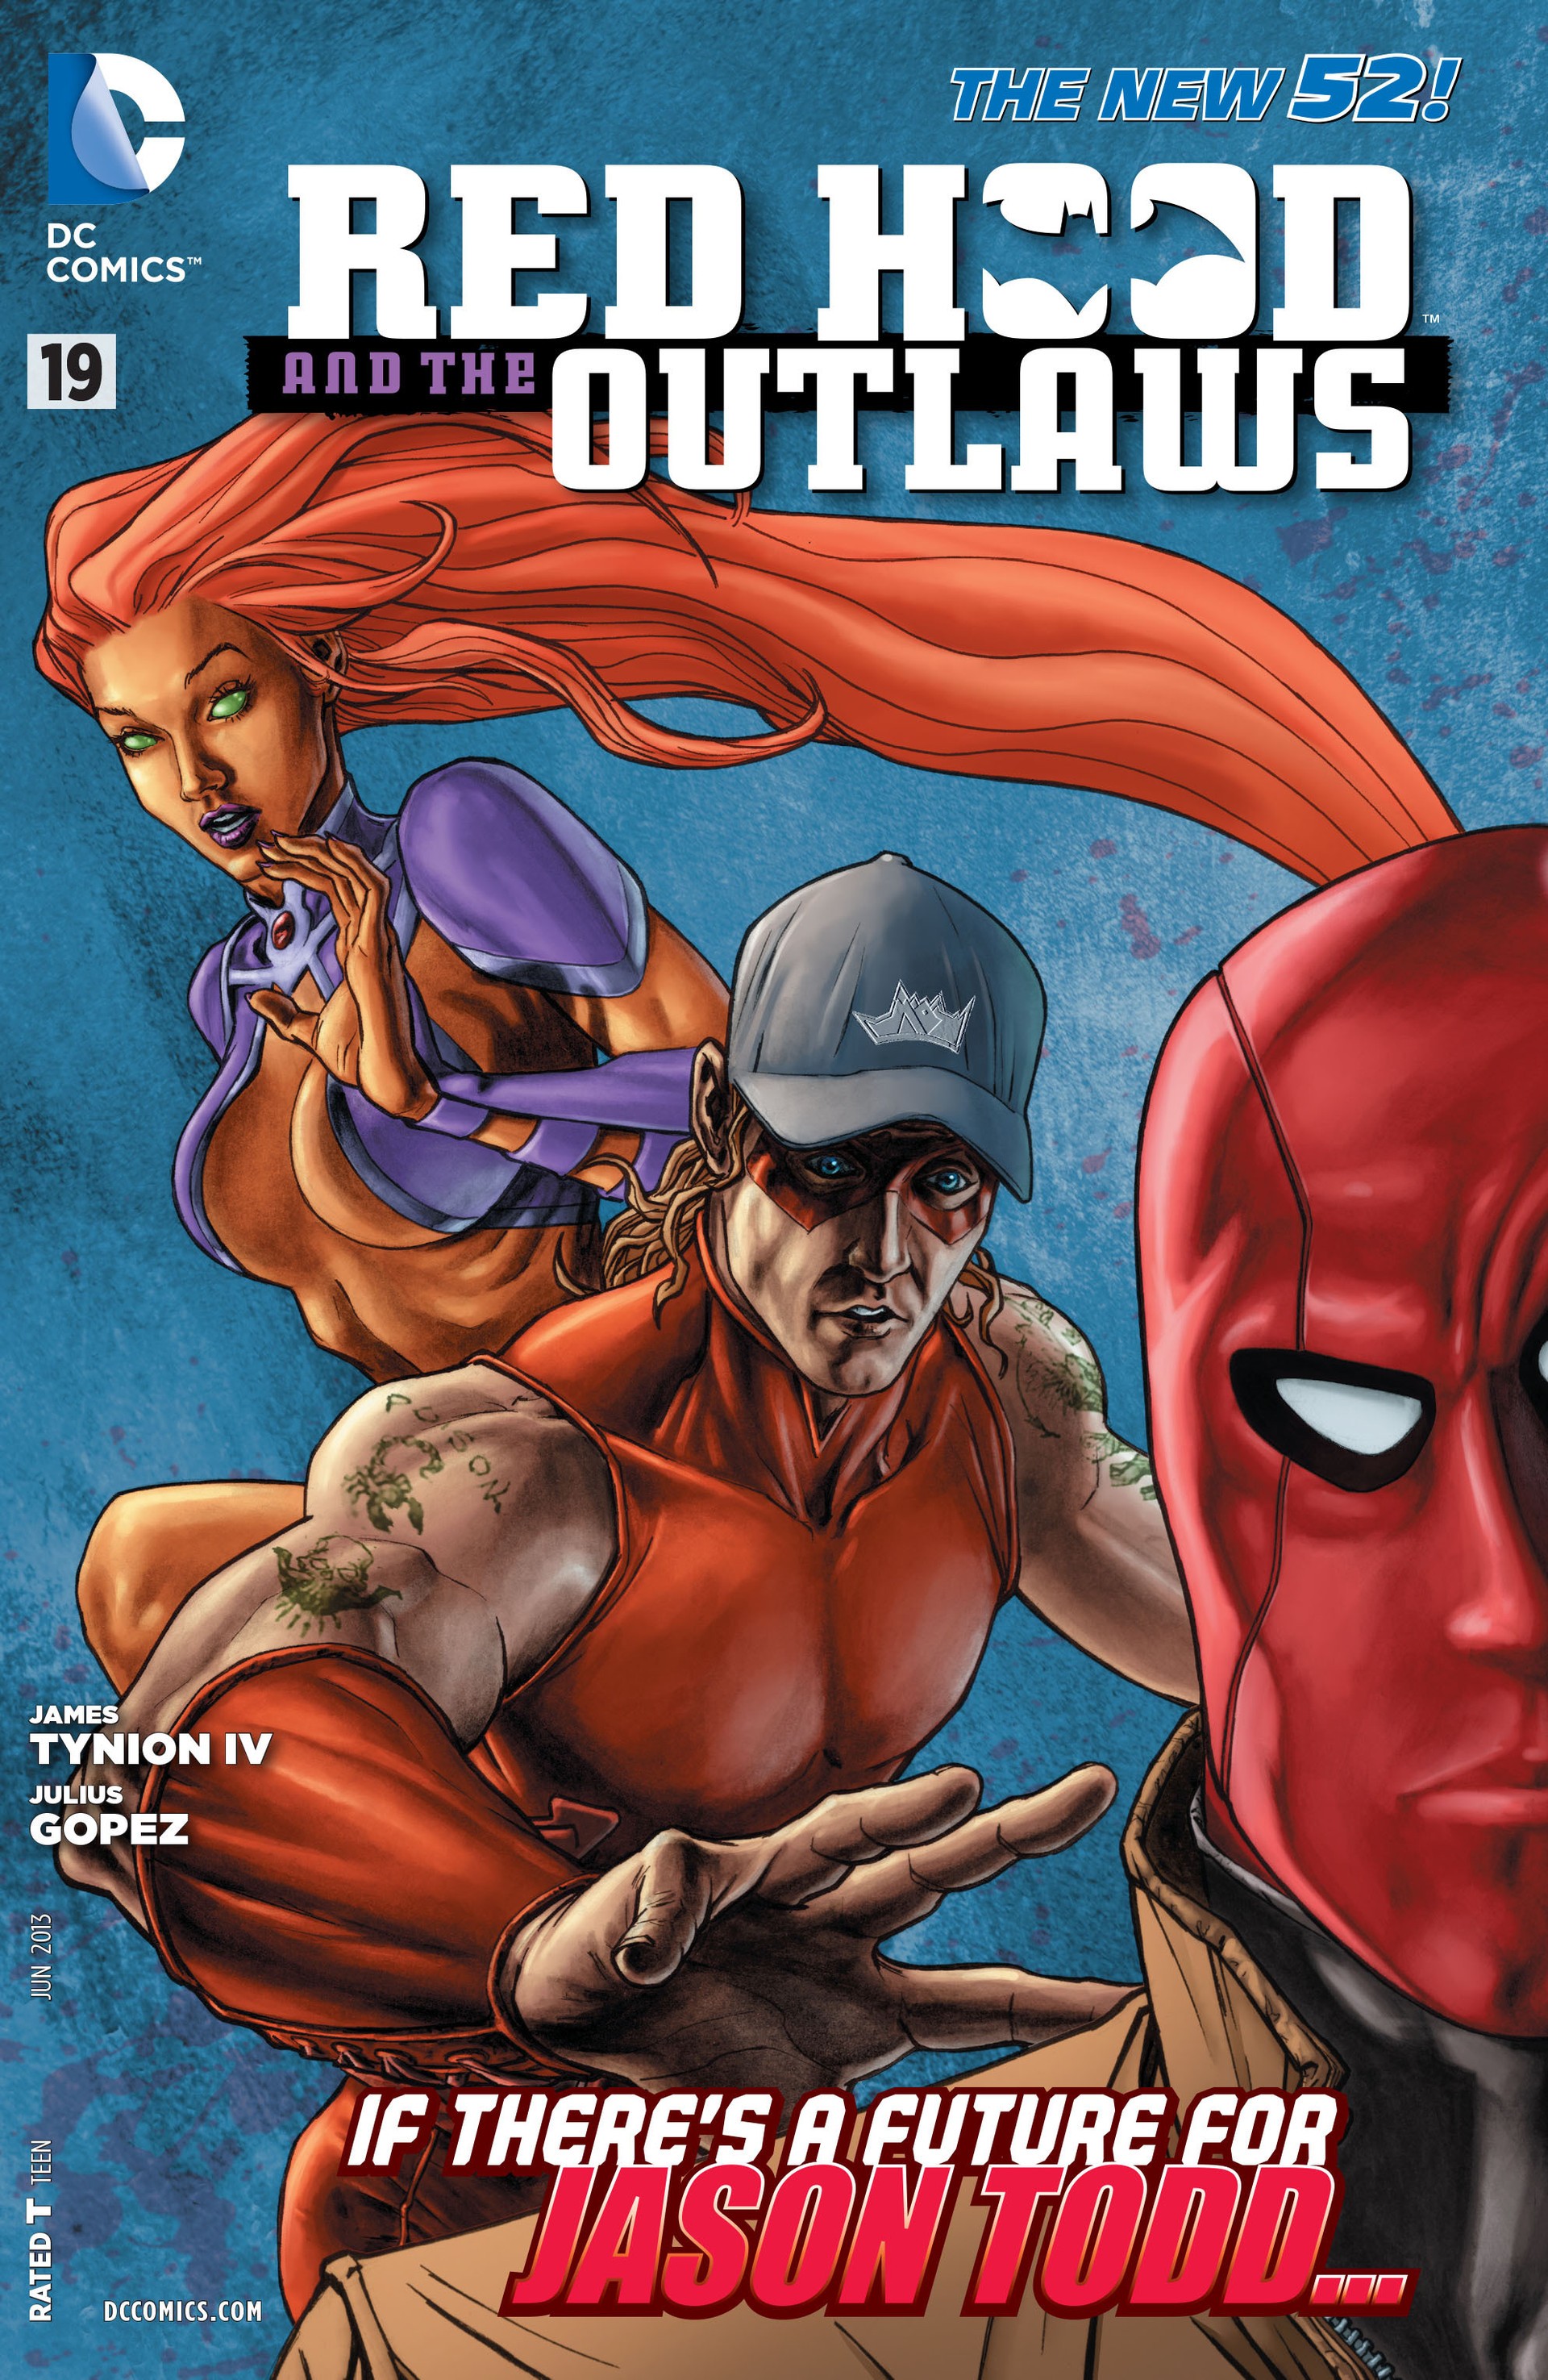 Red Hood and the Outlaws Vol. 1 #19